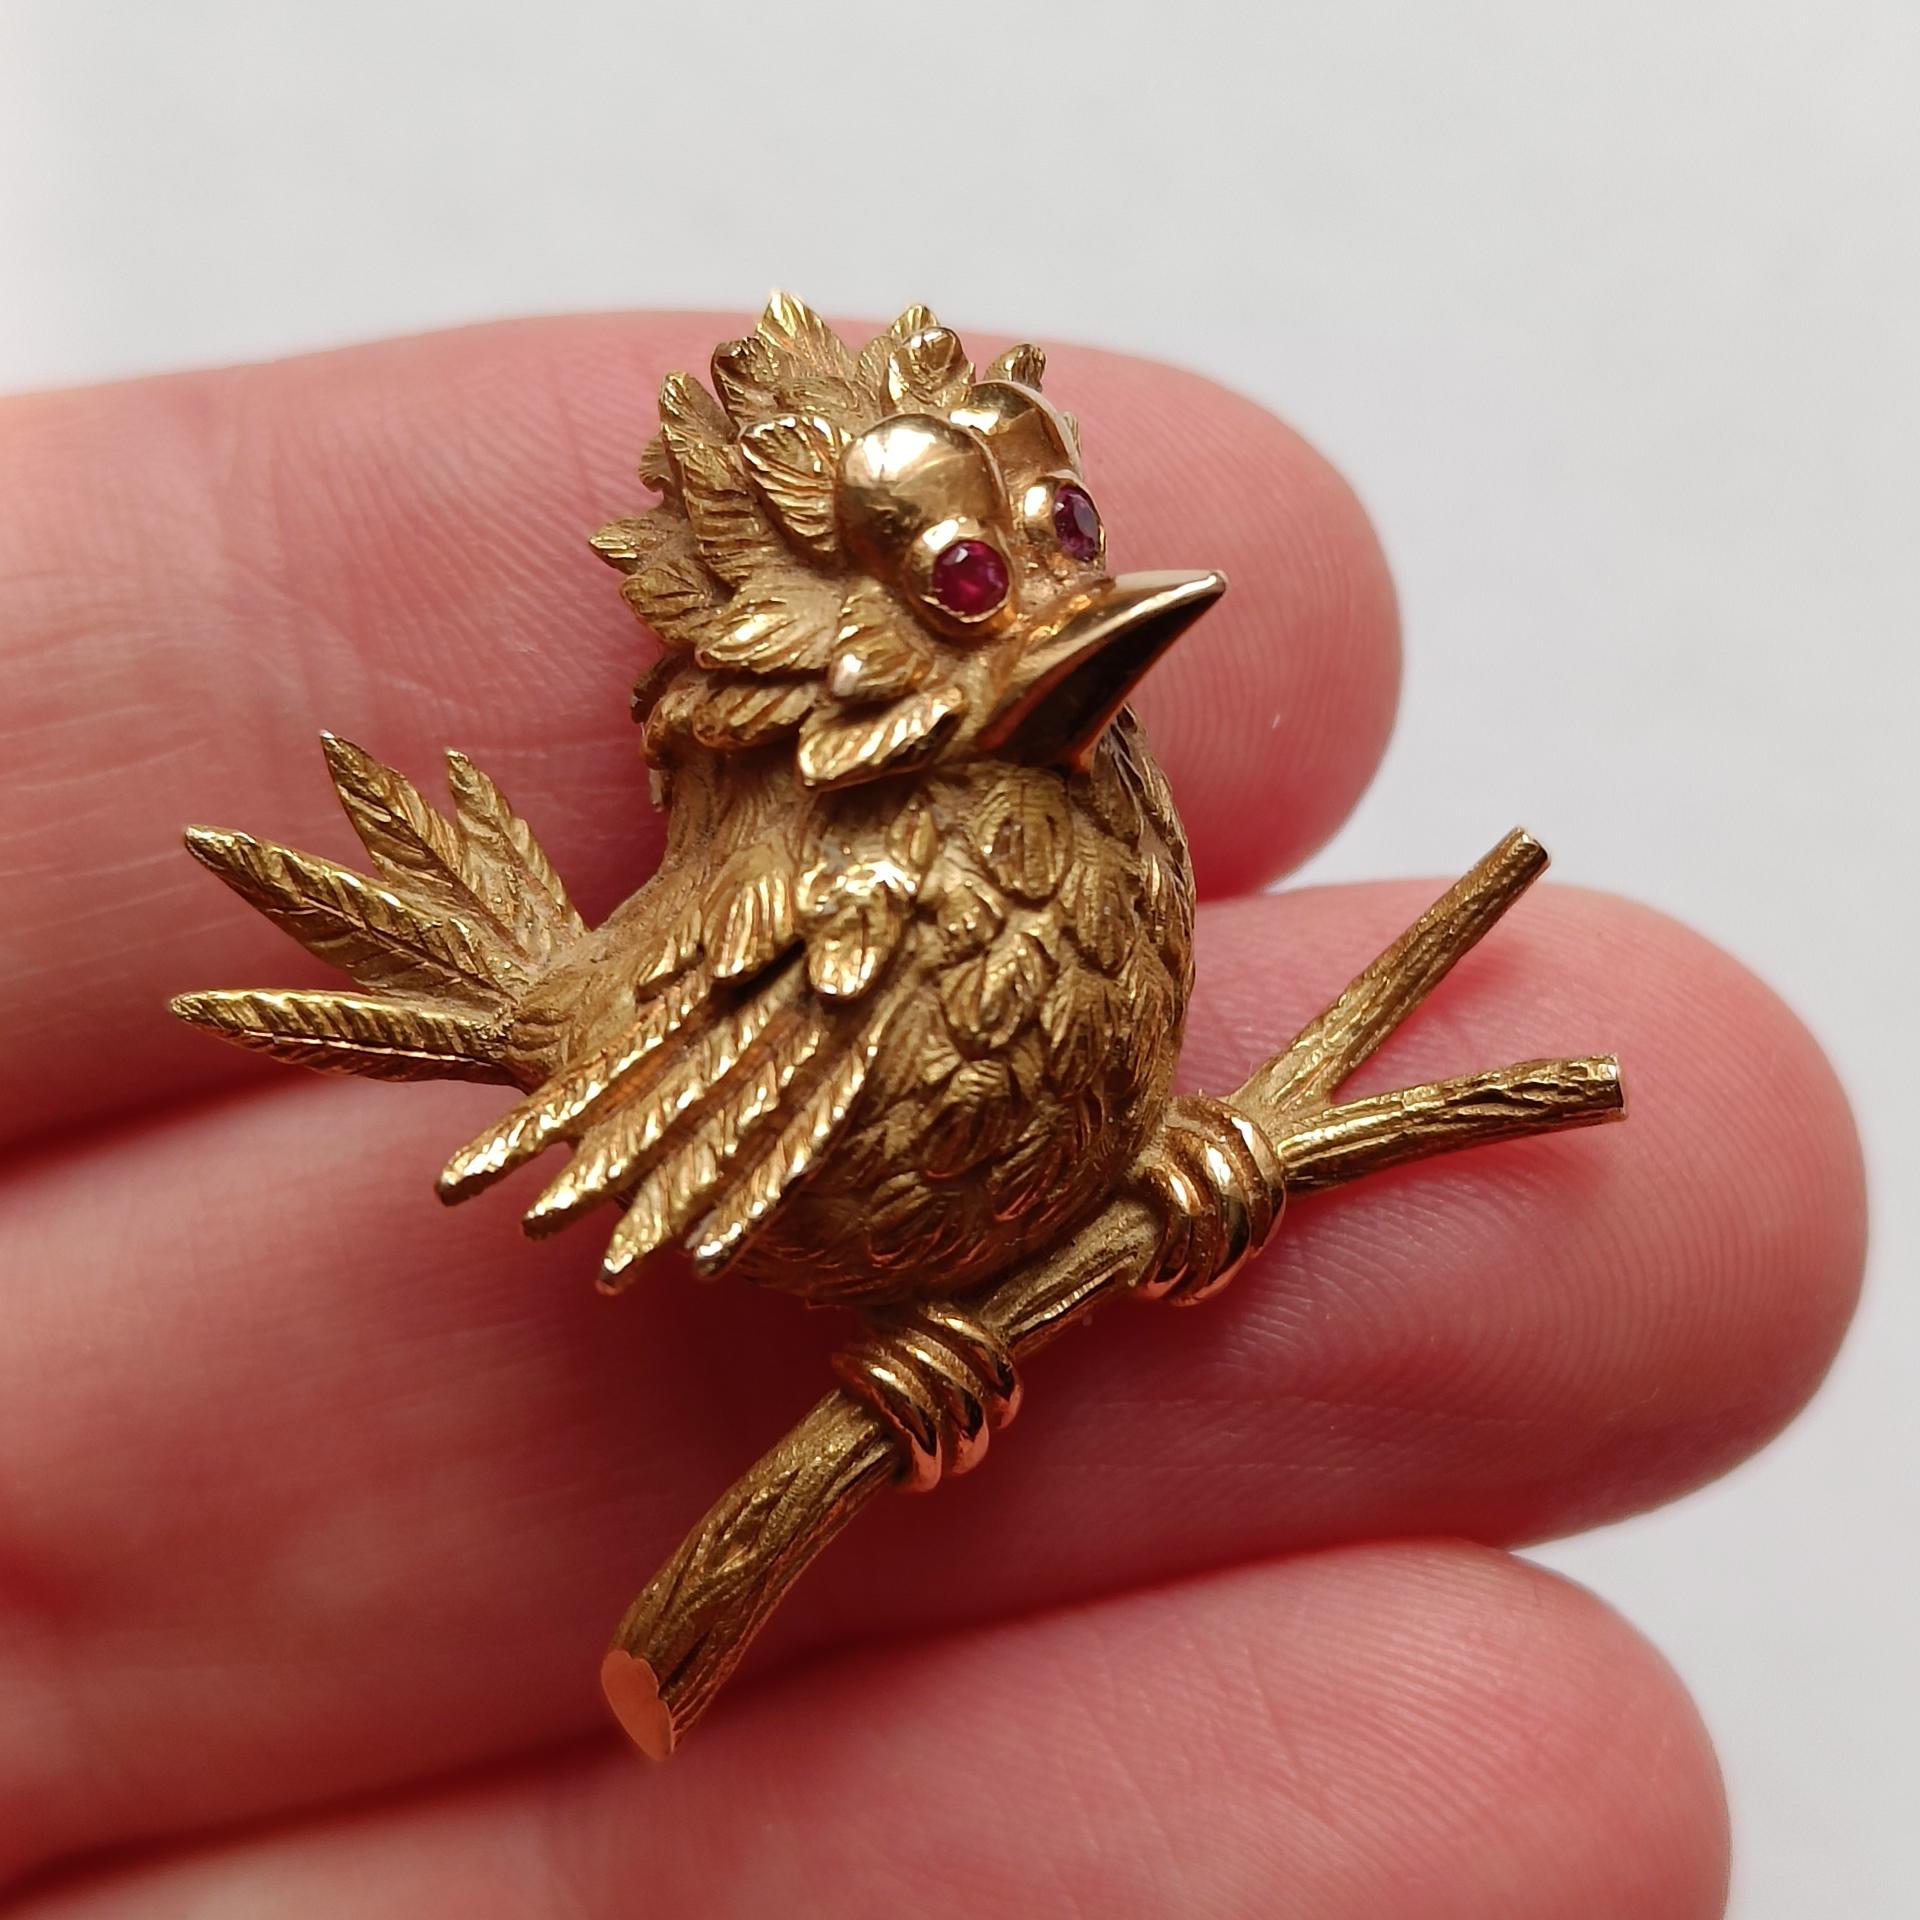 An 18 carat gold brooch depicting a bird perched on a branch. Two faceted red rubies as eyes. High-quality work from the Adolphe Chretien atelier, France. Estimated to be from the 1950s or 1960s. Various hallmarks. 

Excellent